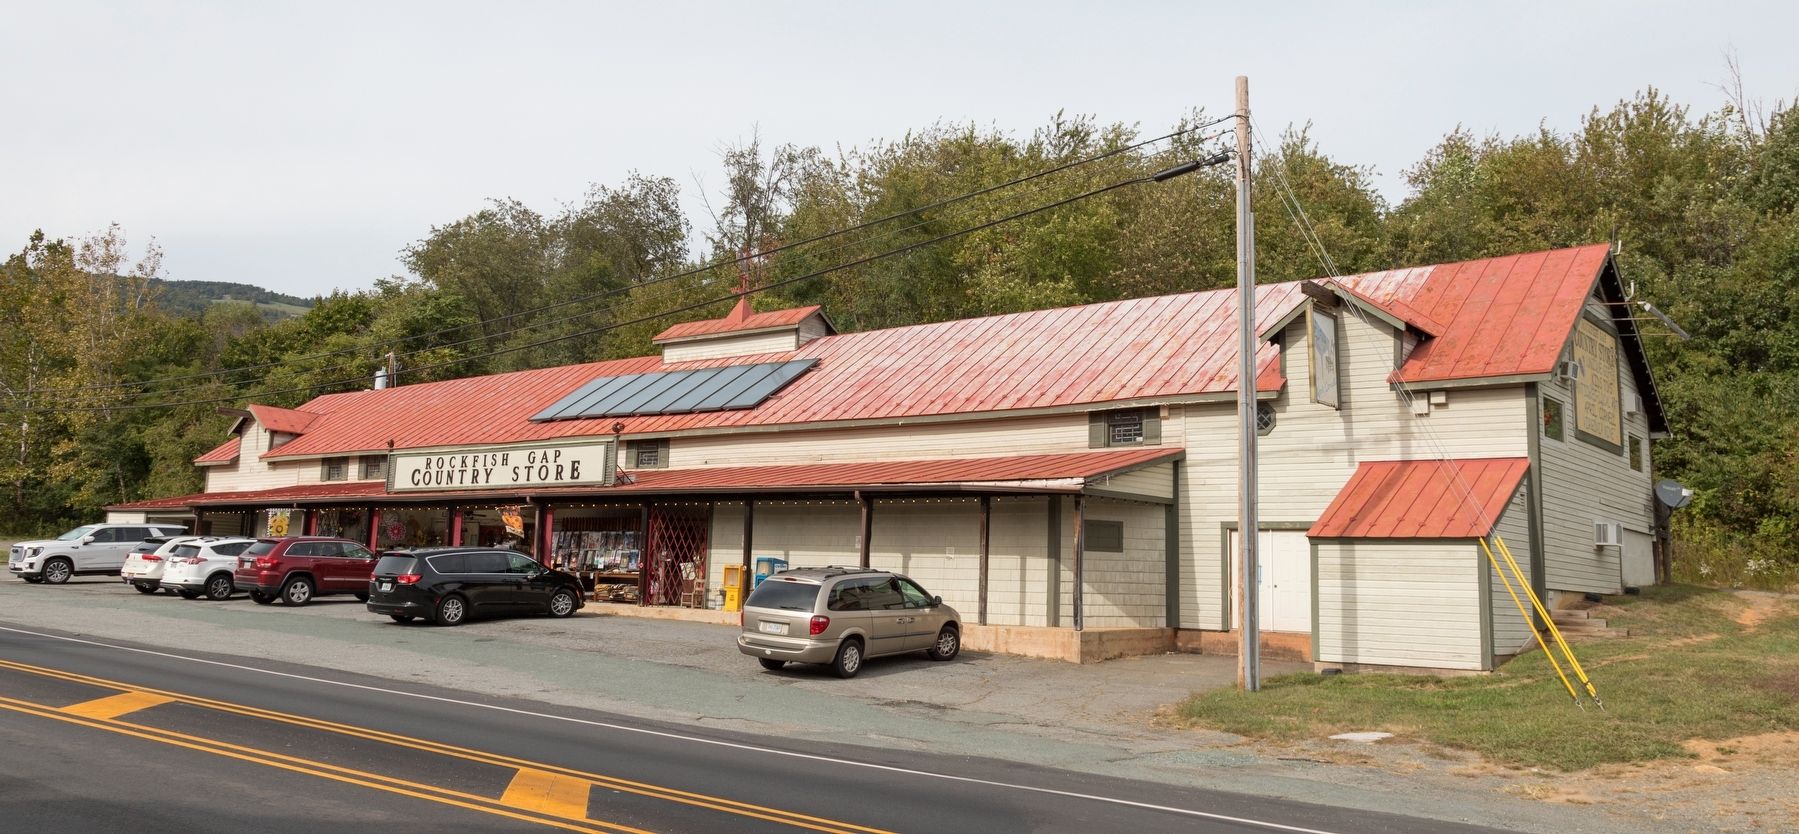 The History of the Rockfish Gap Country Store image. Click for full size.